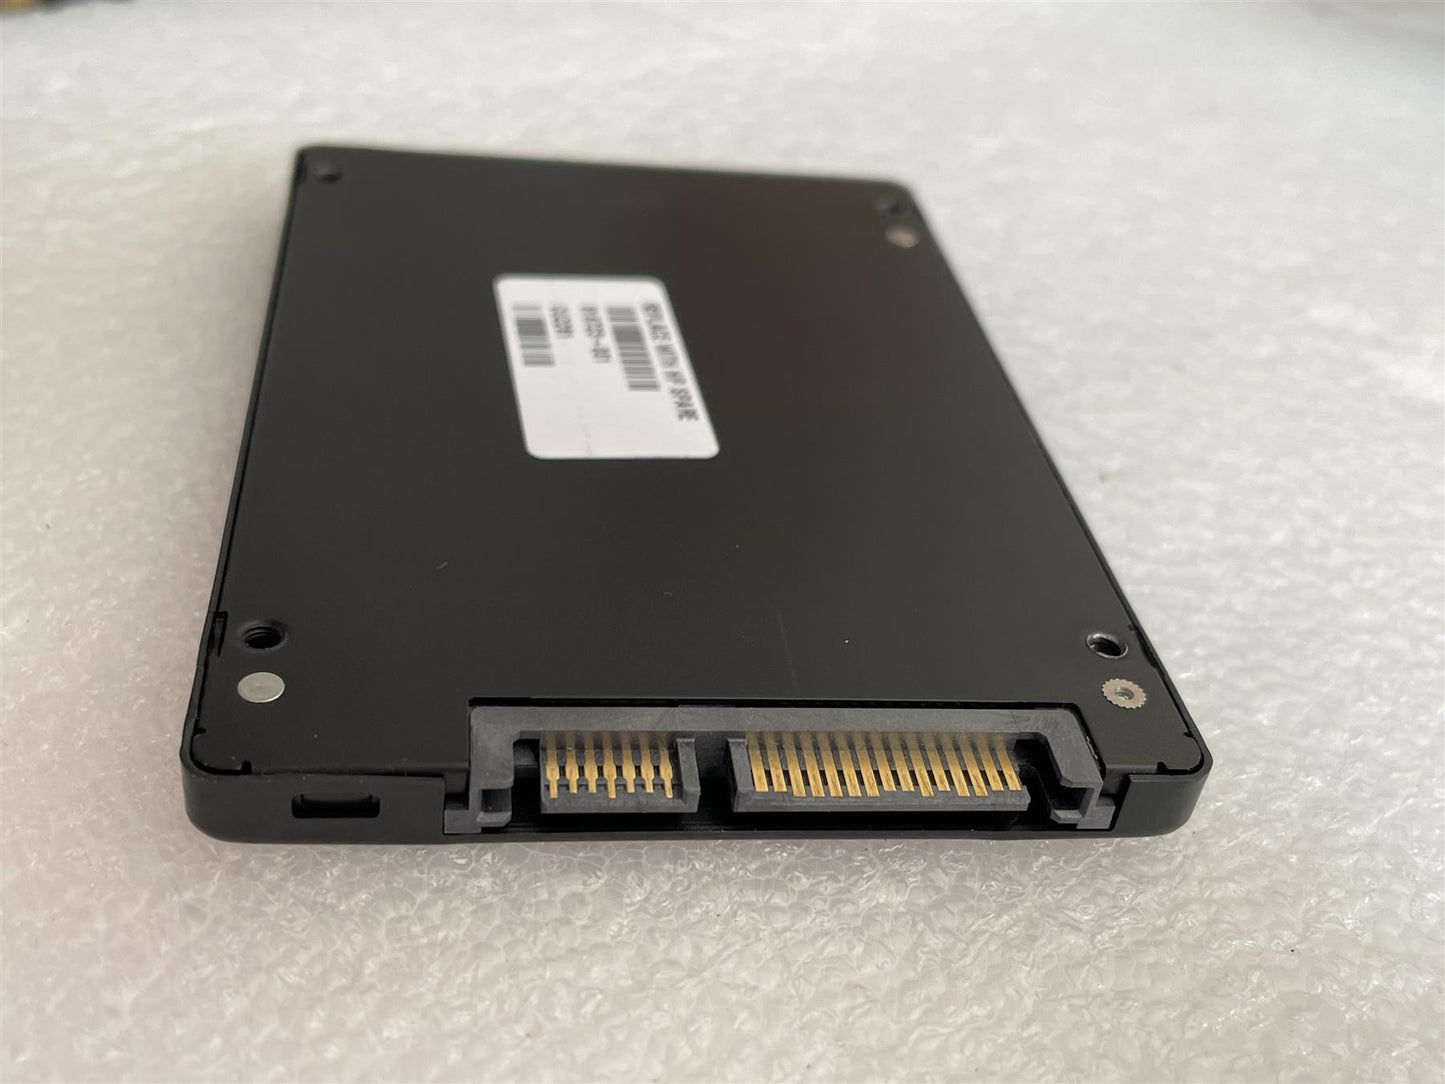 For Hp 816723-001 Micron 1100 2.5 inch MTFDDAK256TBN SSD Solid State Drive NEW